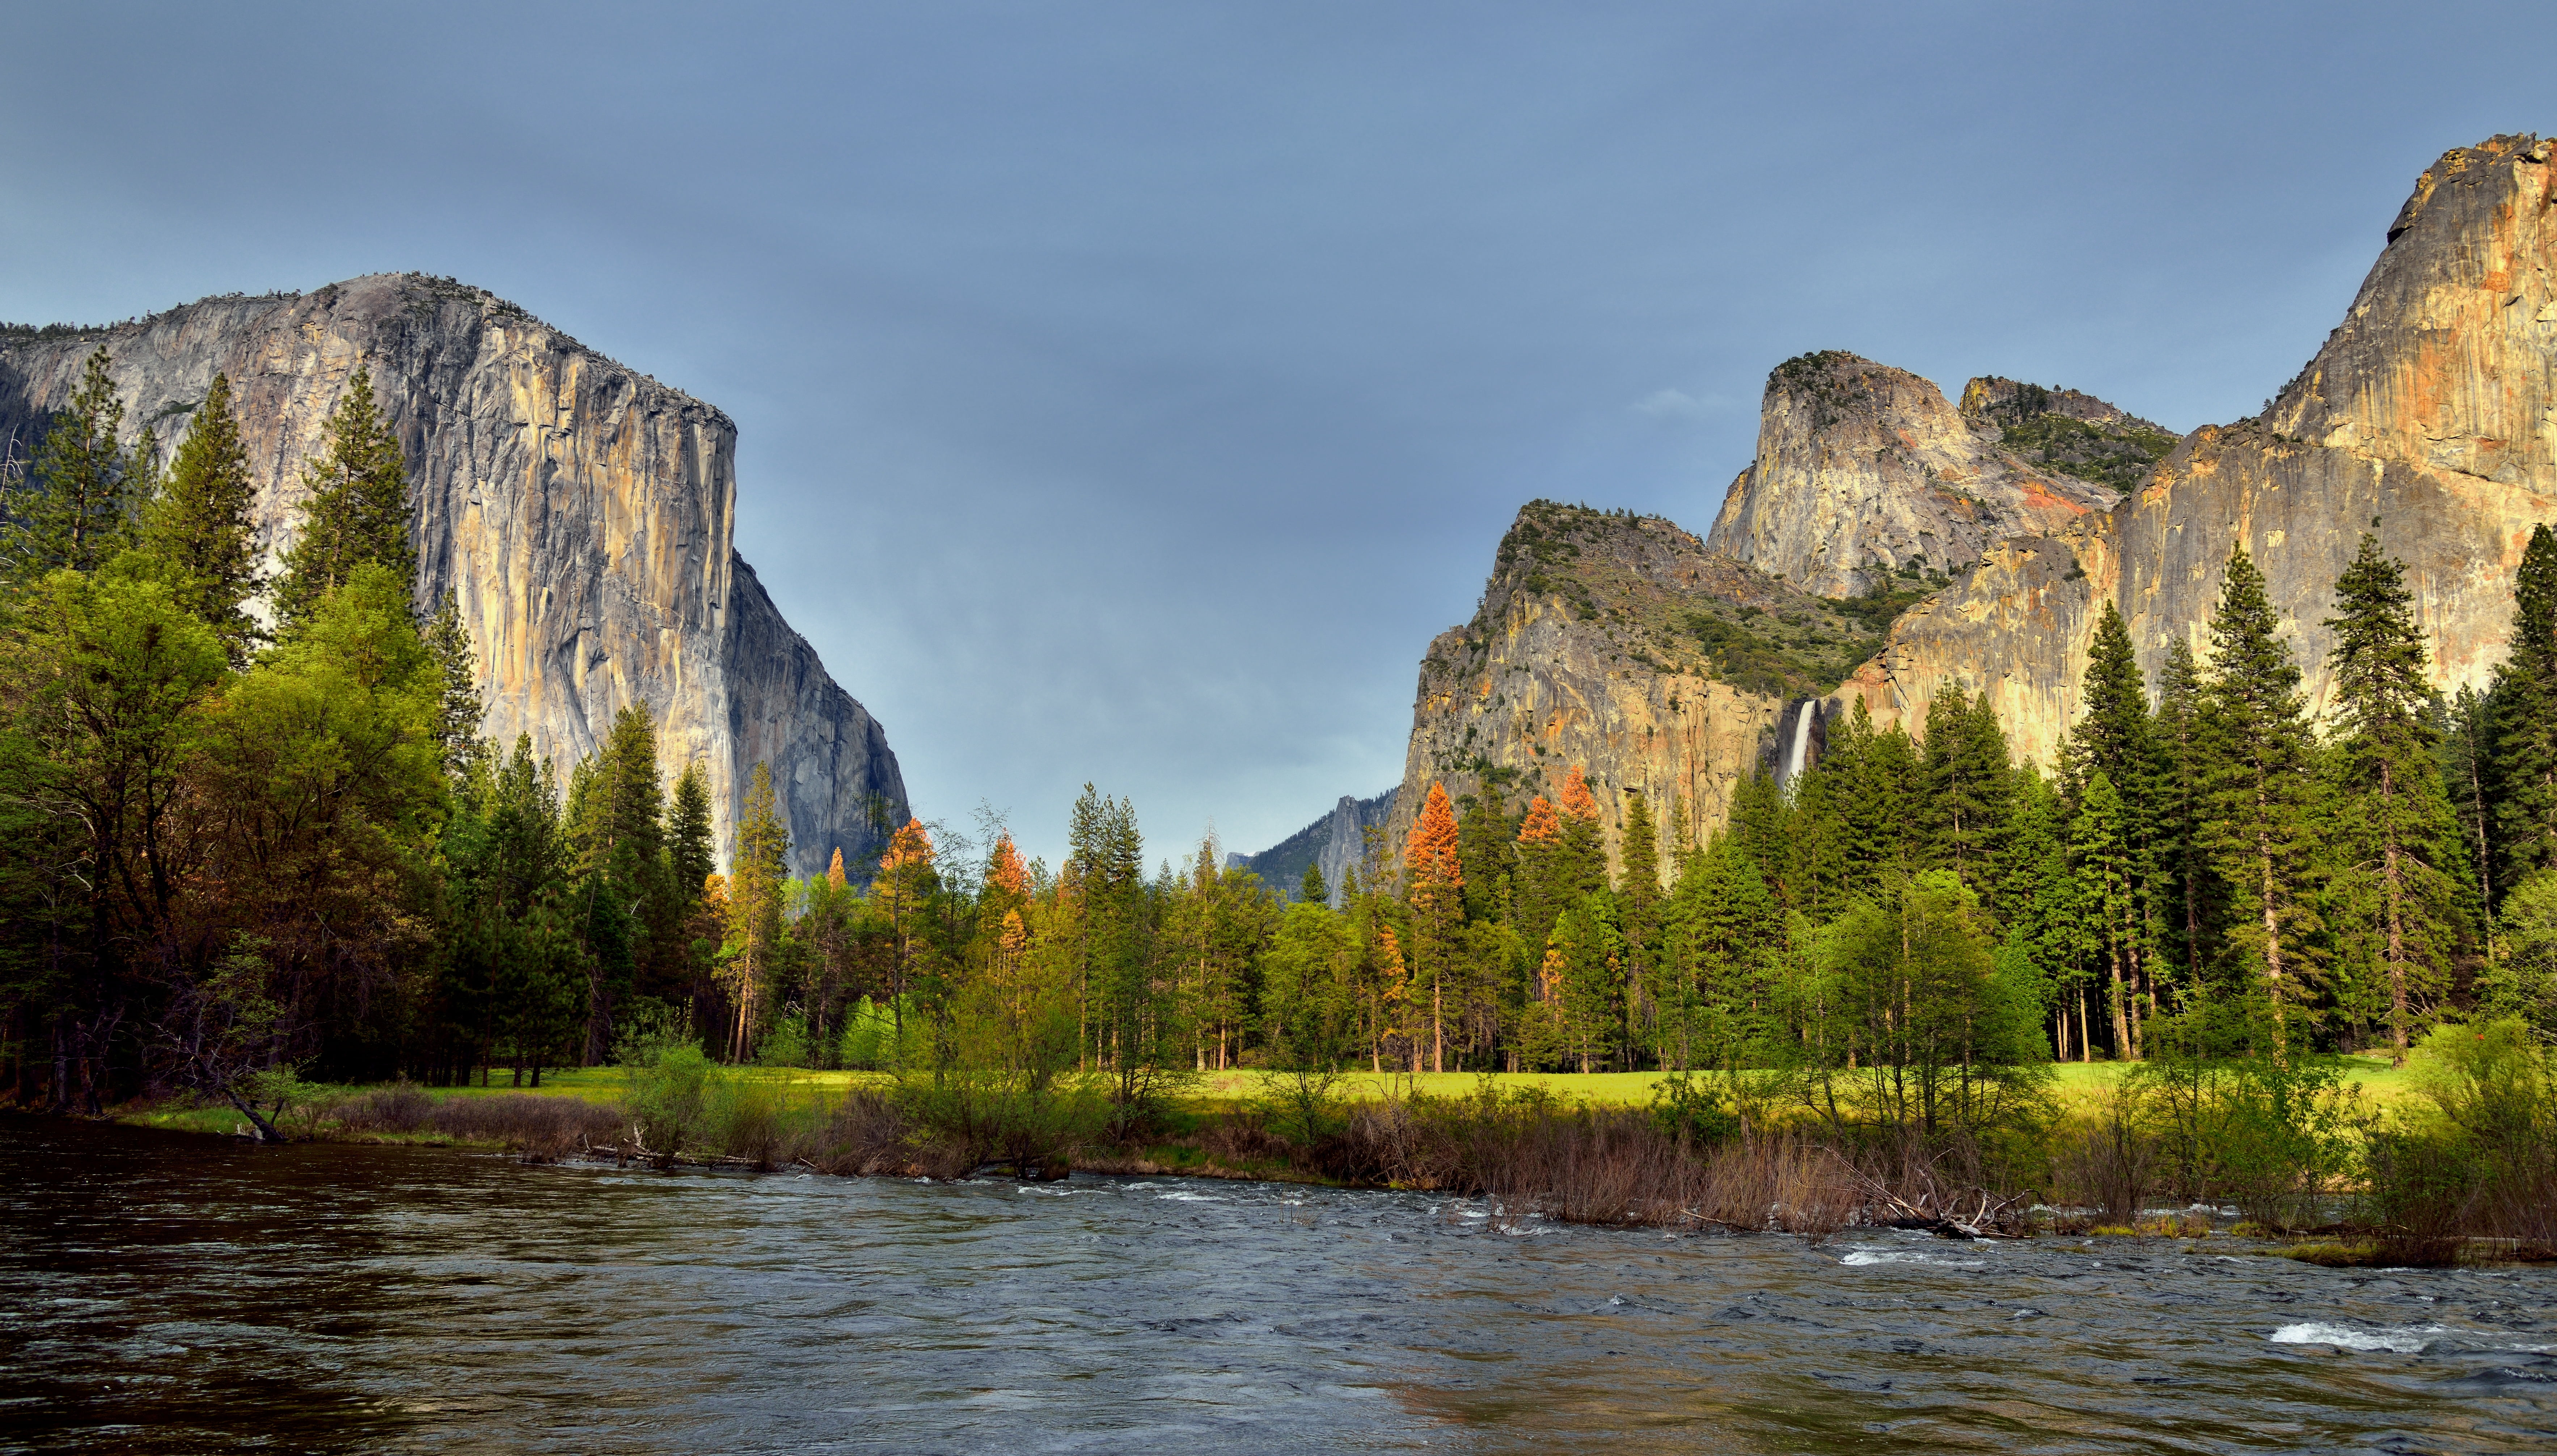 photo of a green tree with body of water, merced river, yosemite national park, merced river, yosemite national park